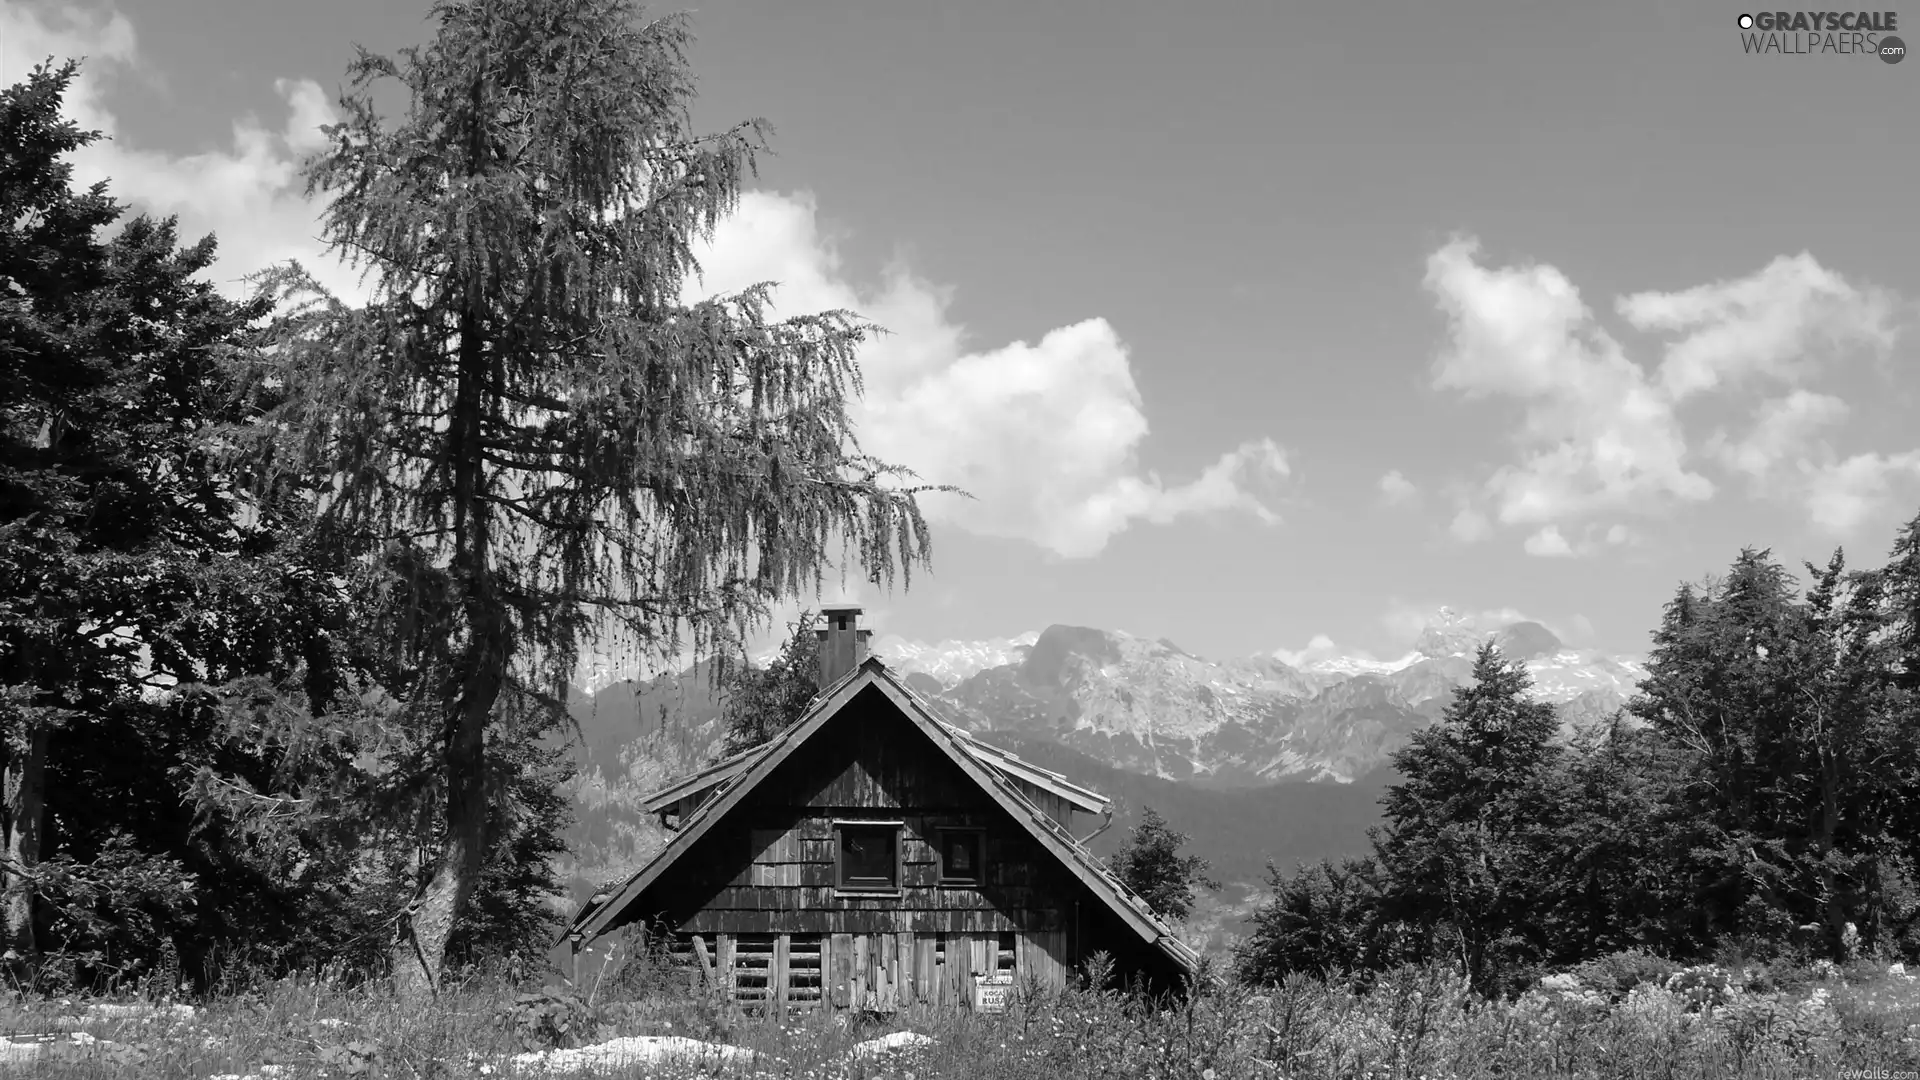 hut, viewes, Mountains, trees